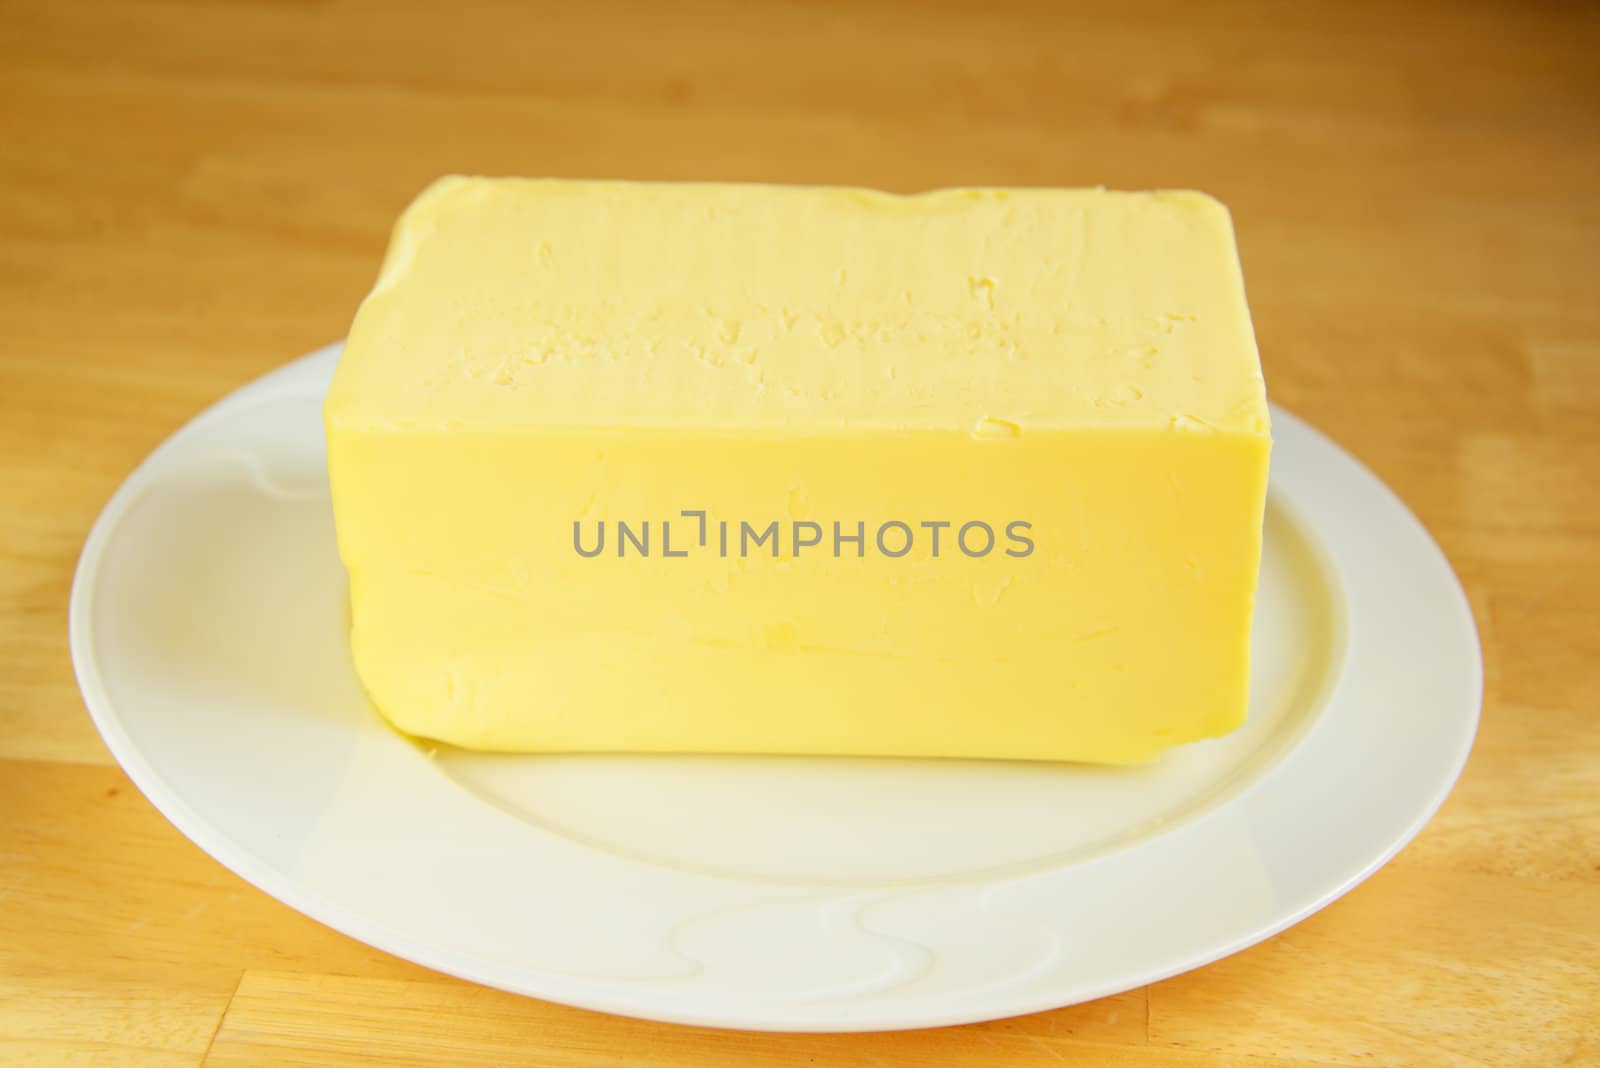 Halv a kilogram of butter on a white plate